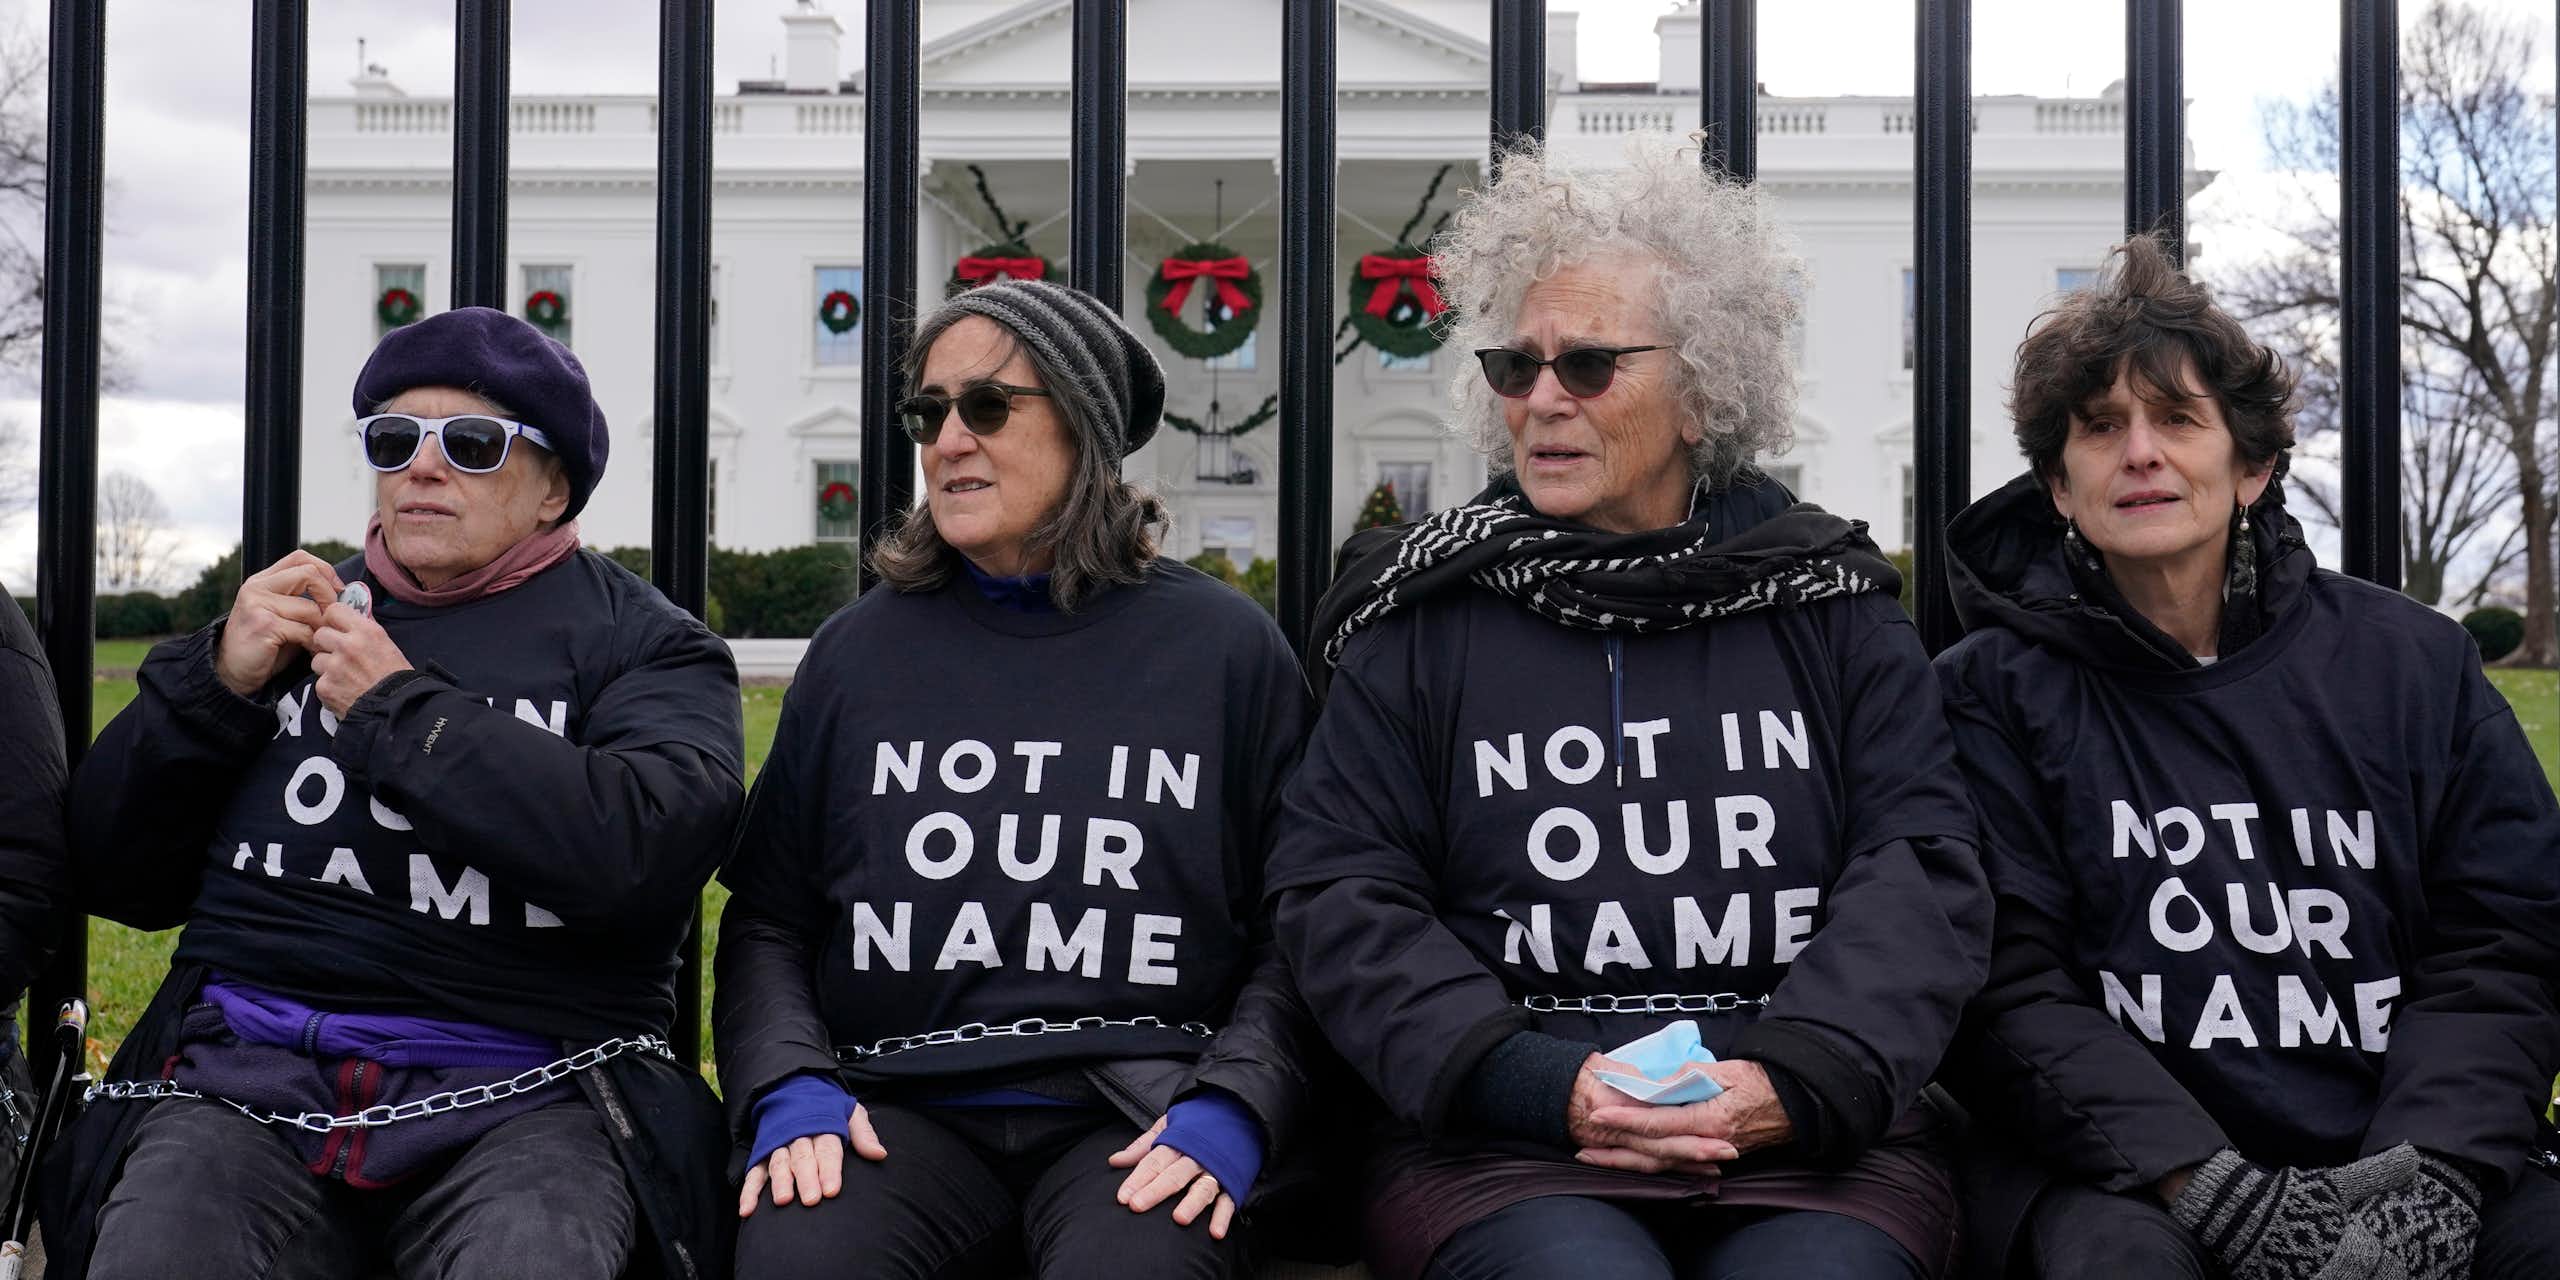 Four women in shirts that say 'Not in our name' sit on a fence with a large white mansion behind them.